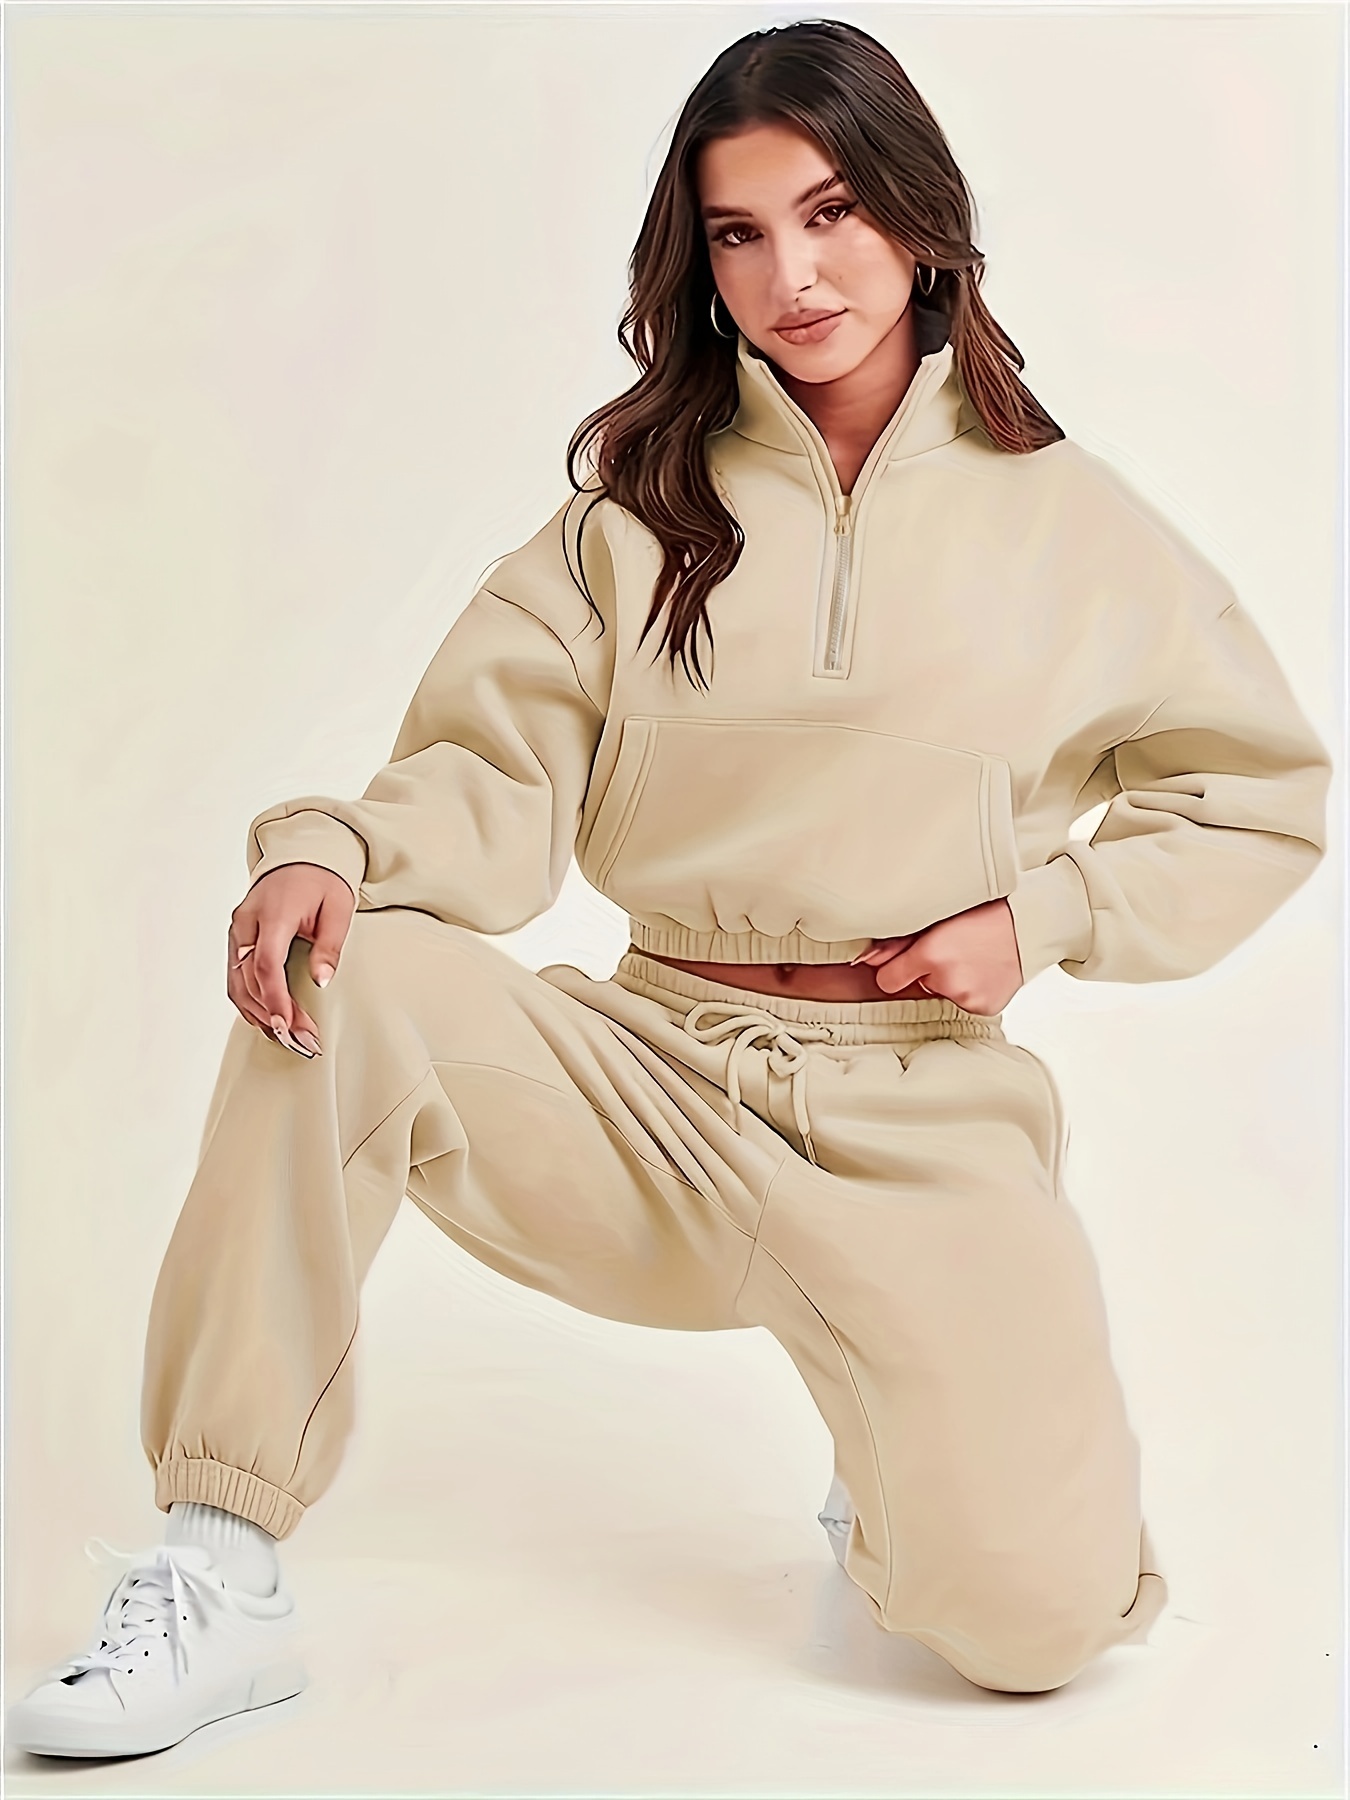  Womens Sweatsuit Set Velour Cropped Long Sleeve Hoodie  Sweatshirt And Sweatpants Sweat Suits 2 Piece Tracksuits Outfits Apricot  Small